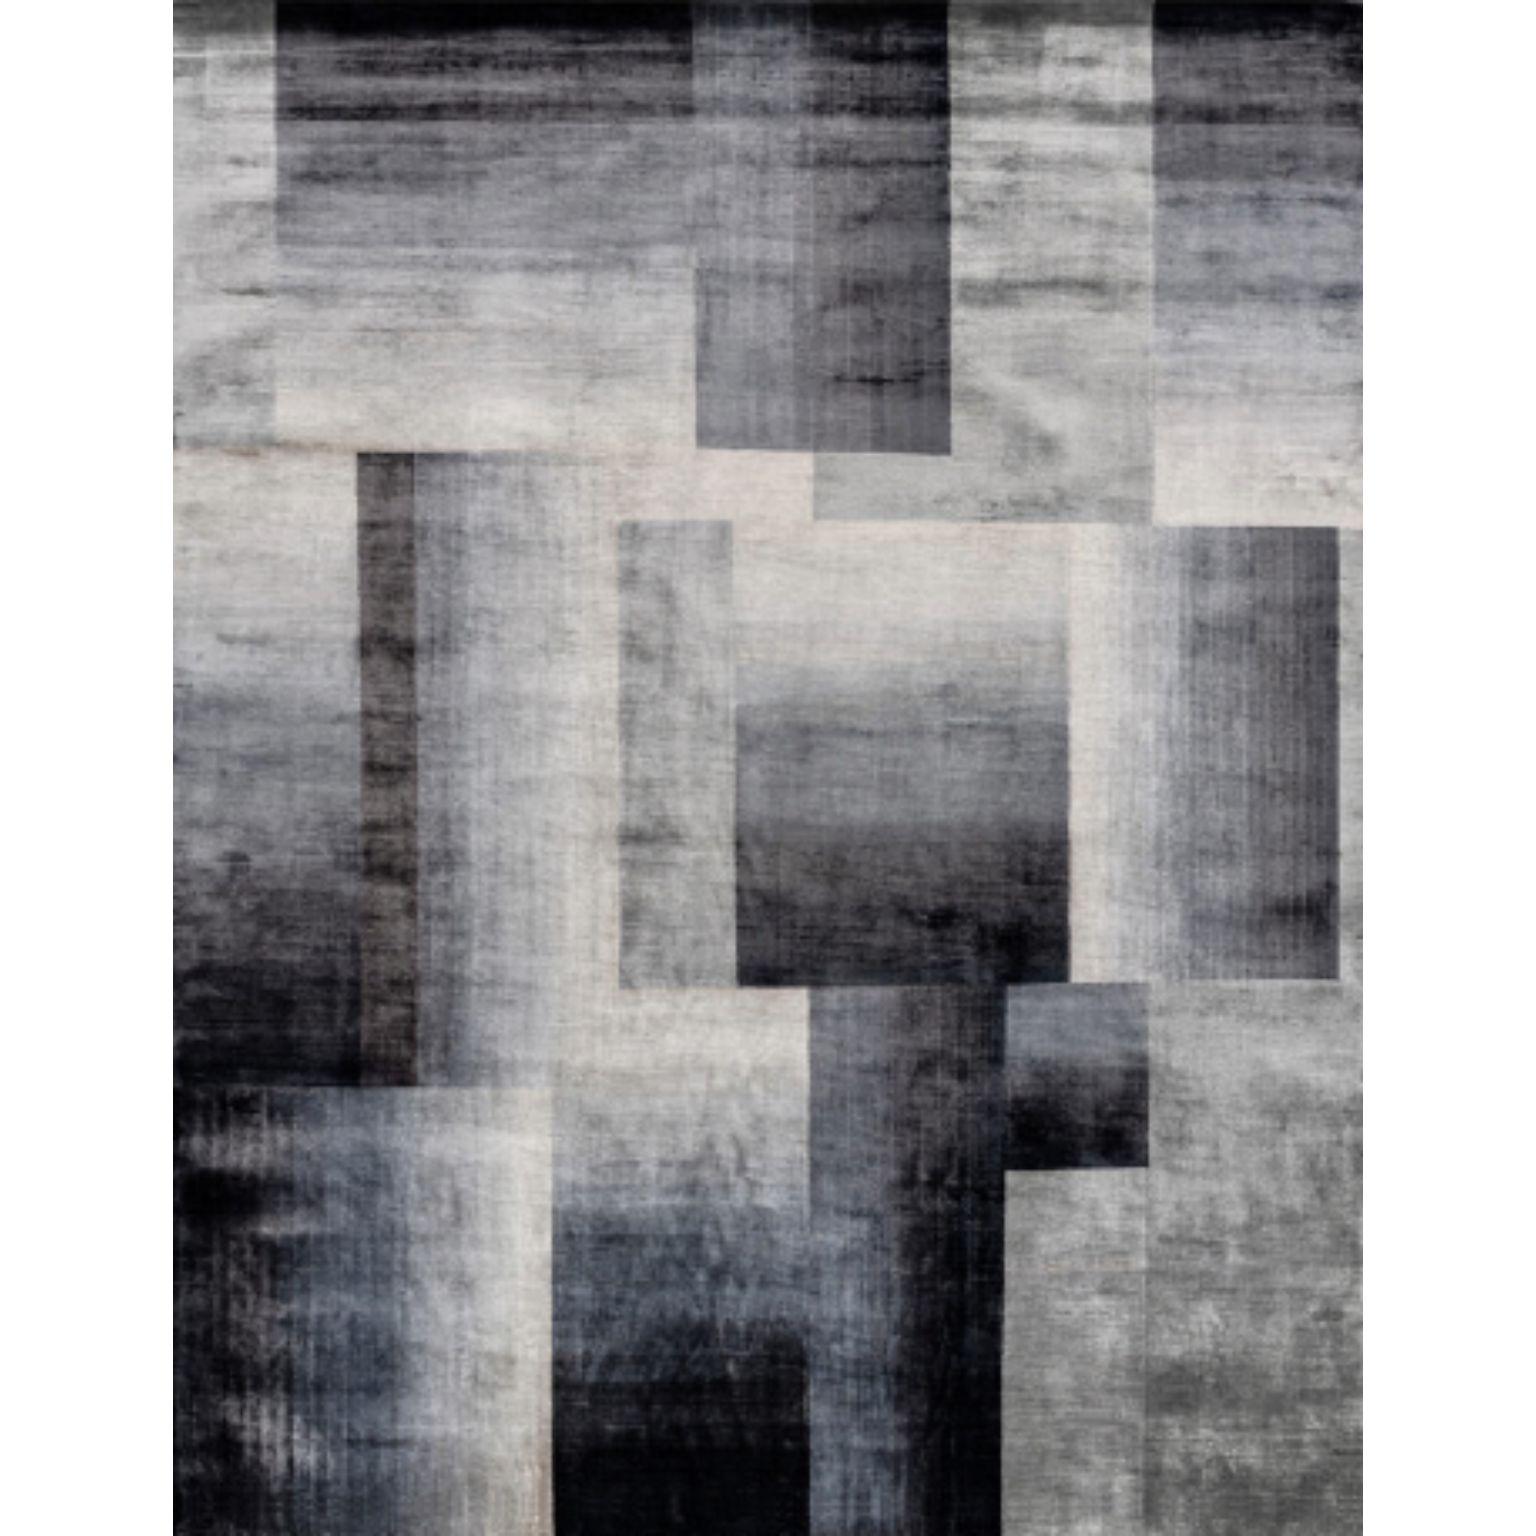 PACIFICO 200 rug by Illulian
Dimensions: D300 x H200 cm 
Materials: wool 50%, silk 50%.
Variations available and prices may vary according to materials and sizes. 

Illulian, historic and prestigious rug company brand, internationally renowned